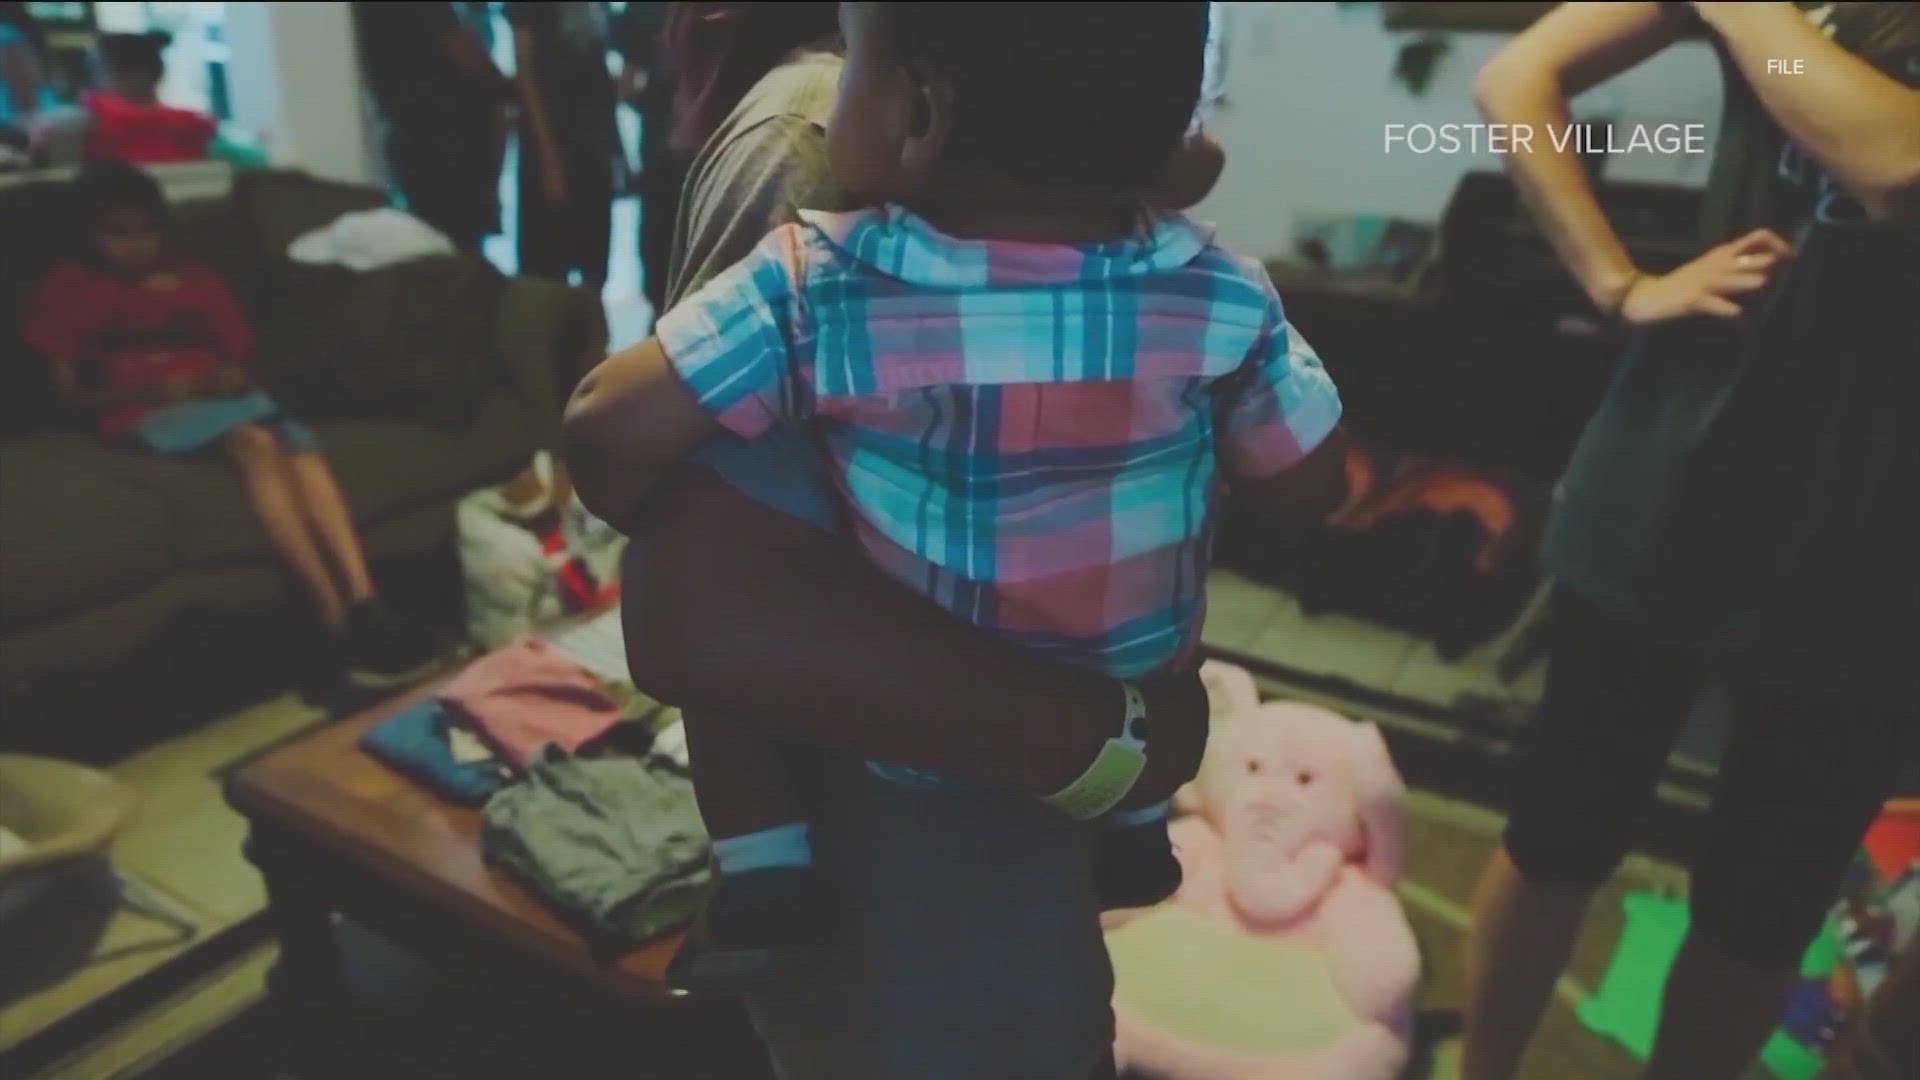 A House bill now in the Senate would require the Texas Department of Family and Protective Services to provide luggage to children in the foster care system.